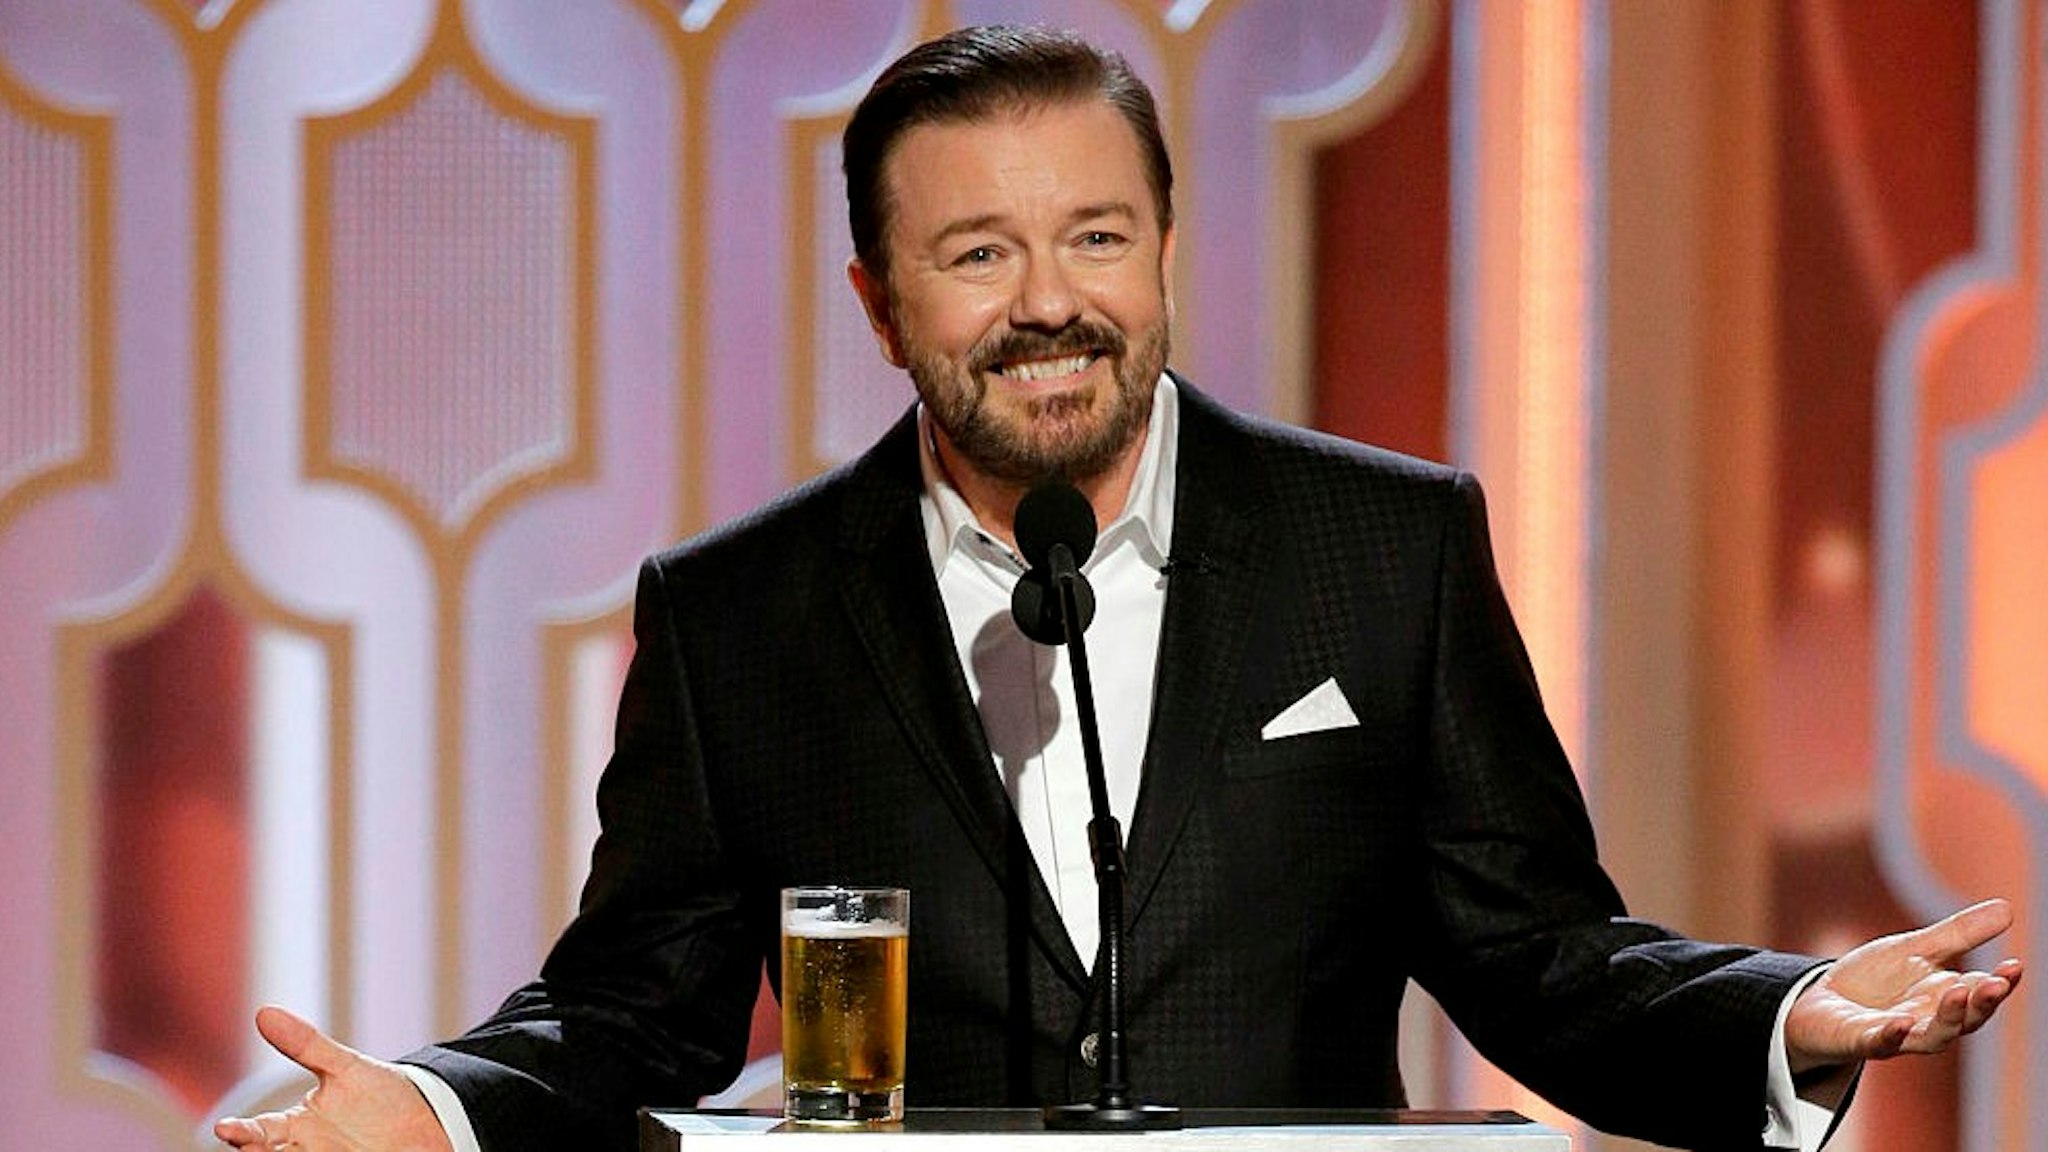 BEVERLY HILLS, CA - JANUARY 10: In this handout photo provided by NBCUniversal, Host Ricky Gervais speaks onstage during the 73rd Annual Golden Globe Awards at The Beverly Hilton Hotel on January 10, 2016 in Beverly Hills, California. (Photo by